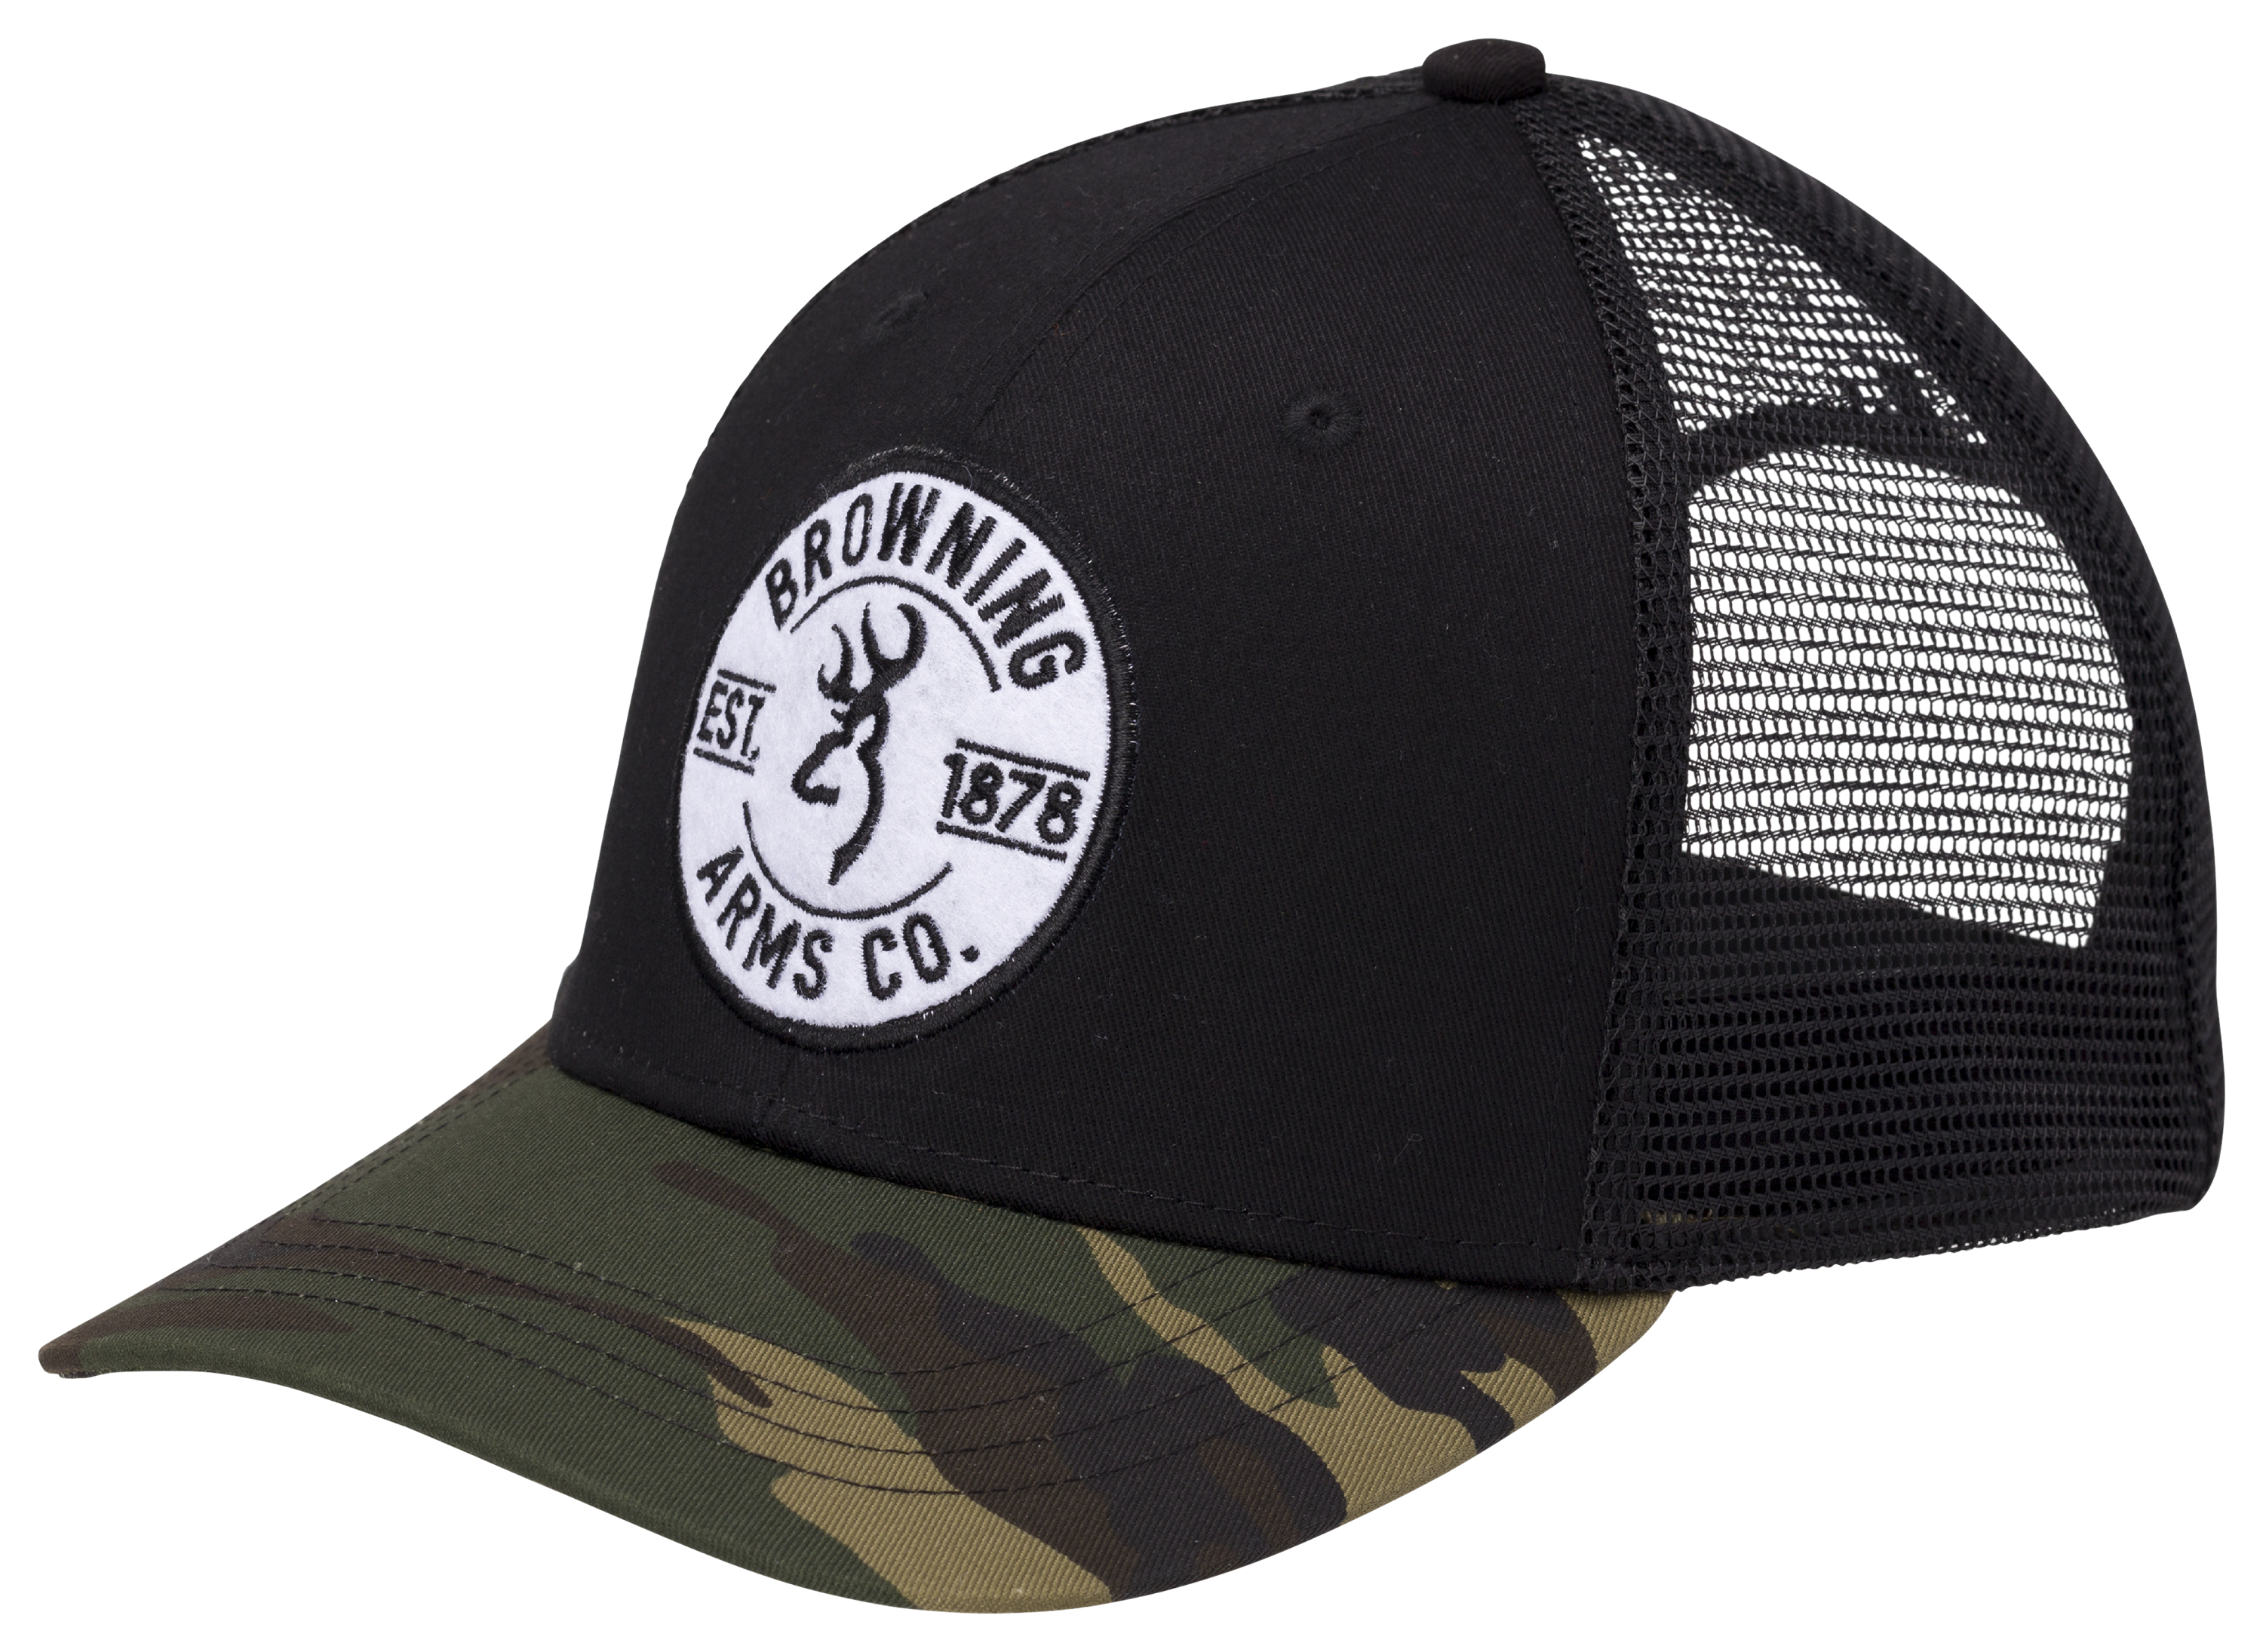 Browning Prime Cap | Bass Pro Shops